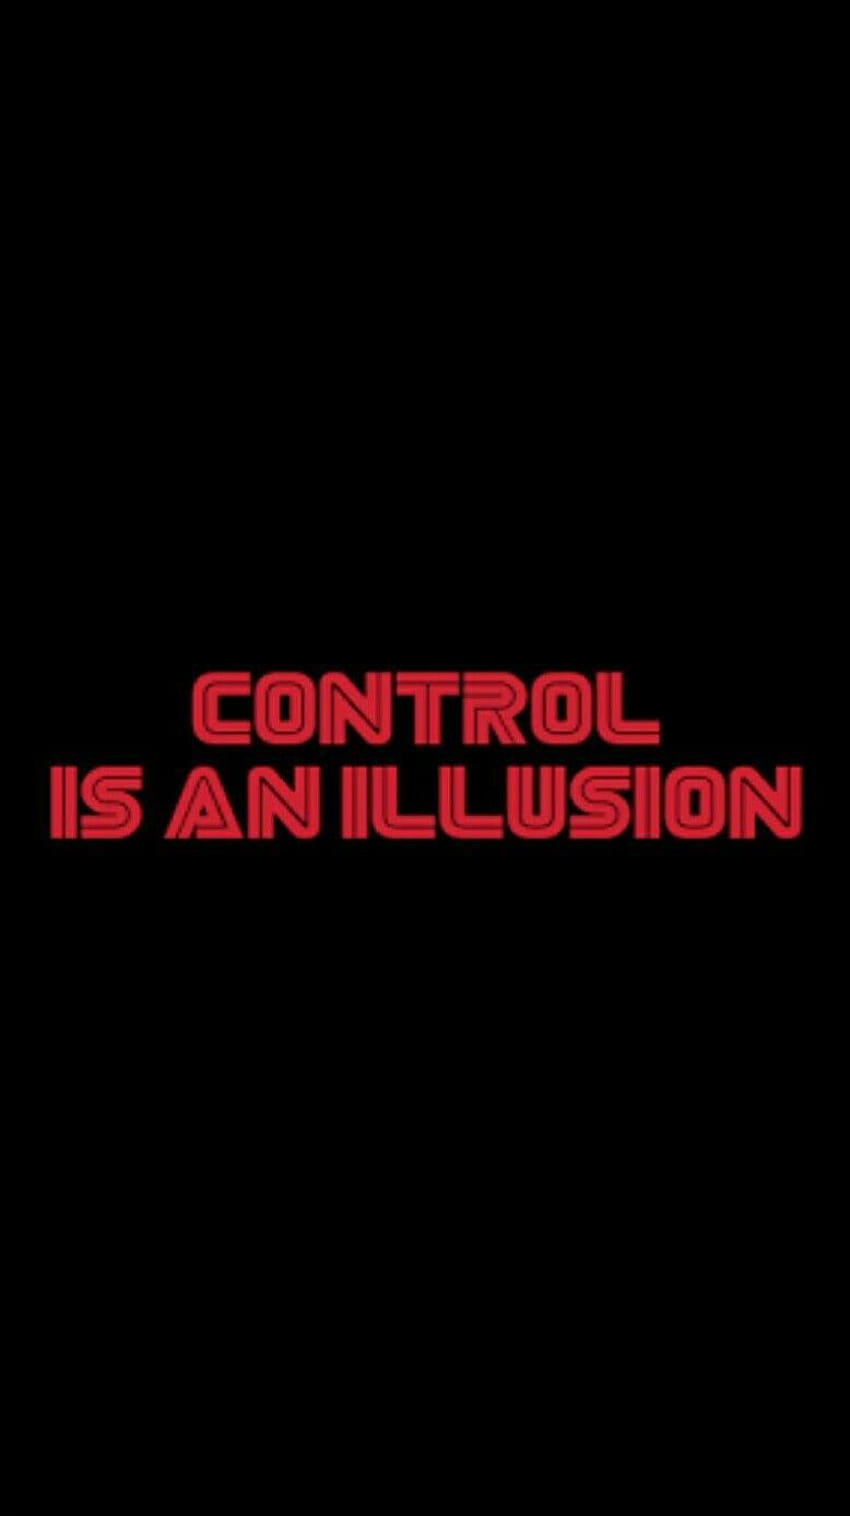 Mr. Robot Control Is An Illusion, mr robot android HD phone wallpaper